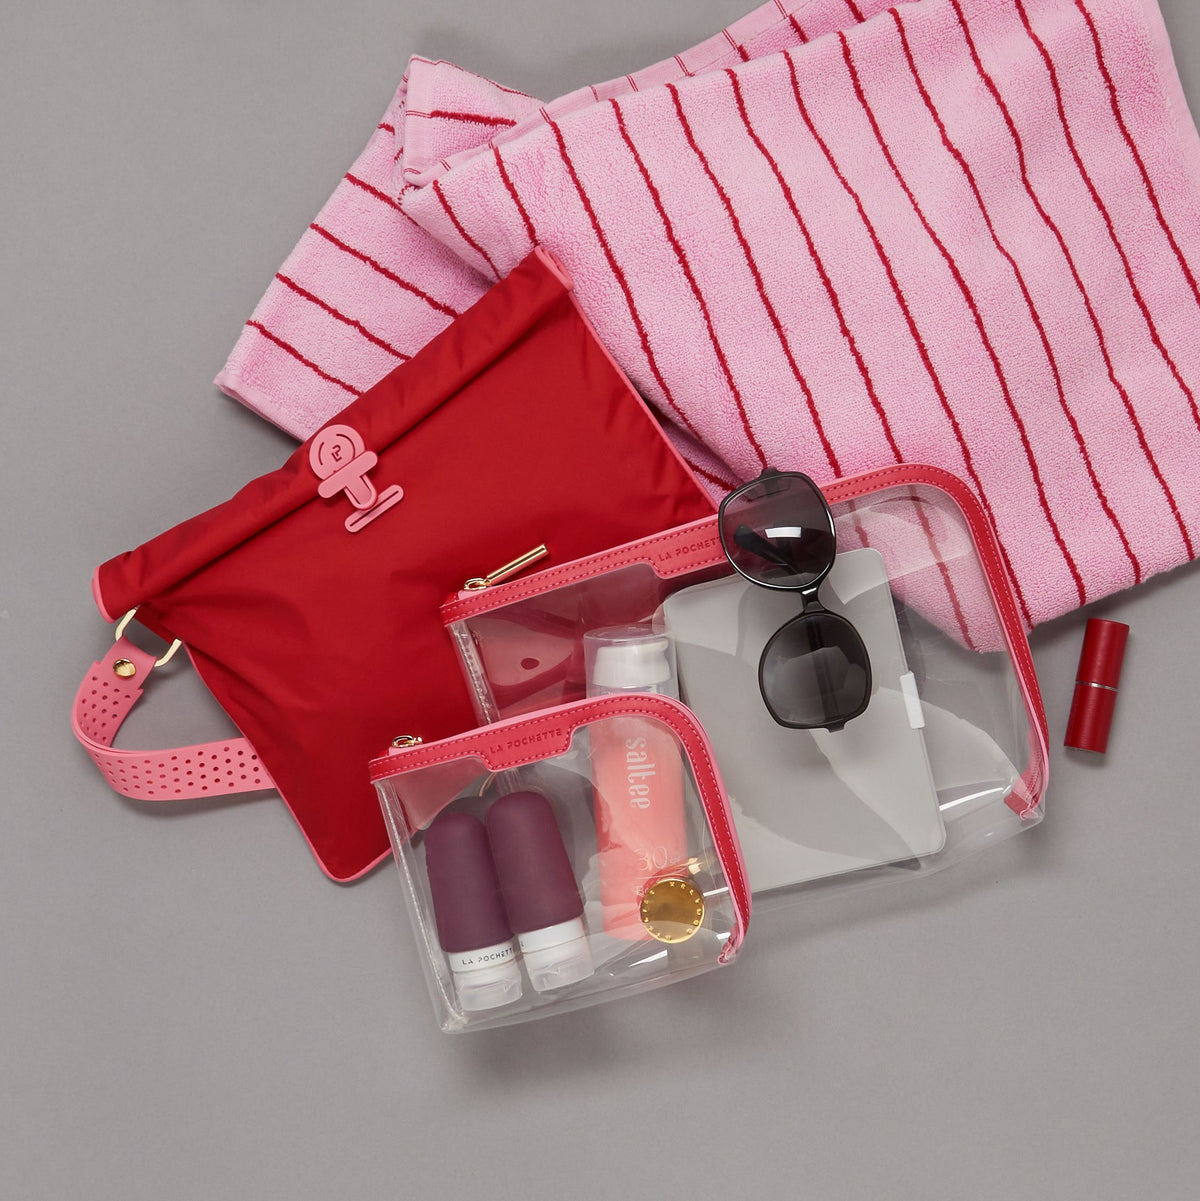 Large Wet Bag in Chilli and Peony colour way lying flat with a Large Anywhere Everything and Small Anywhere Everywhere Pouch containing La Pochette silicone travel bottles, a lipstick, and beach towel 